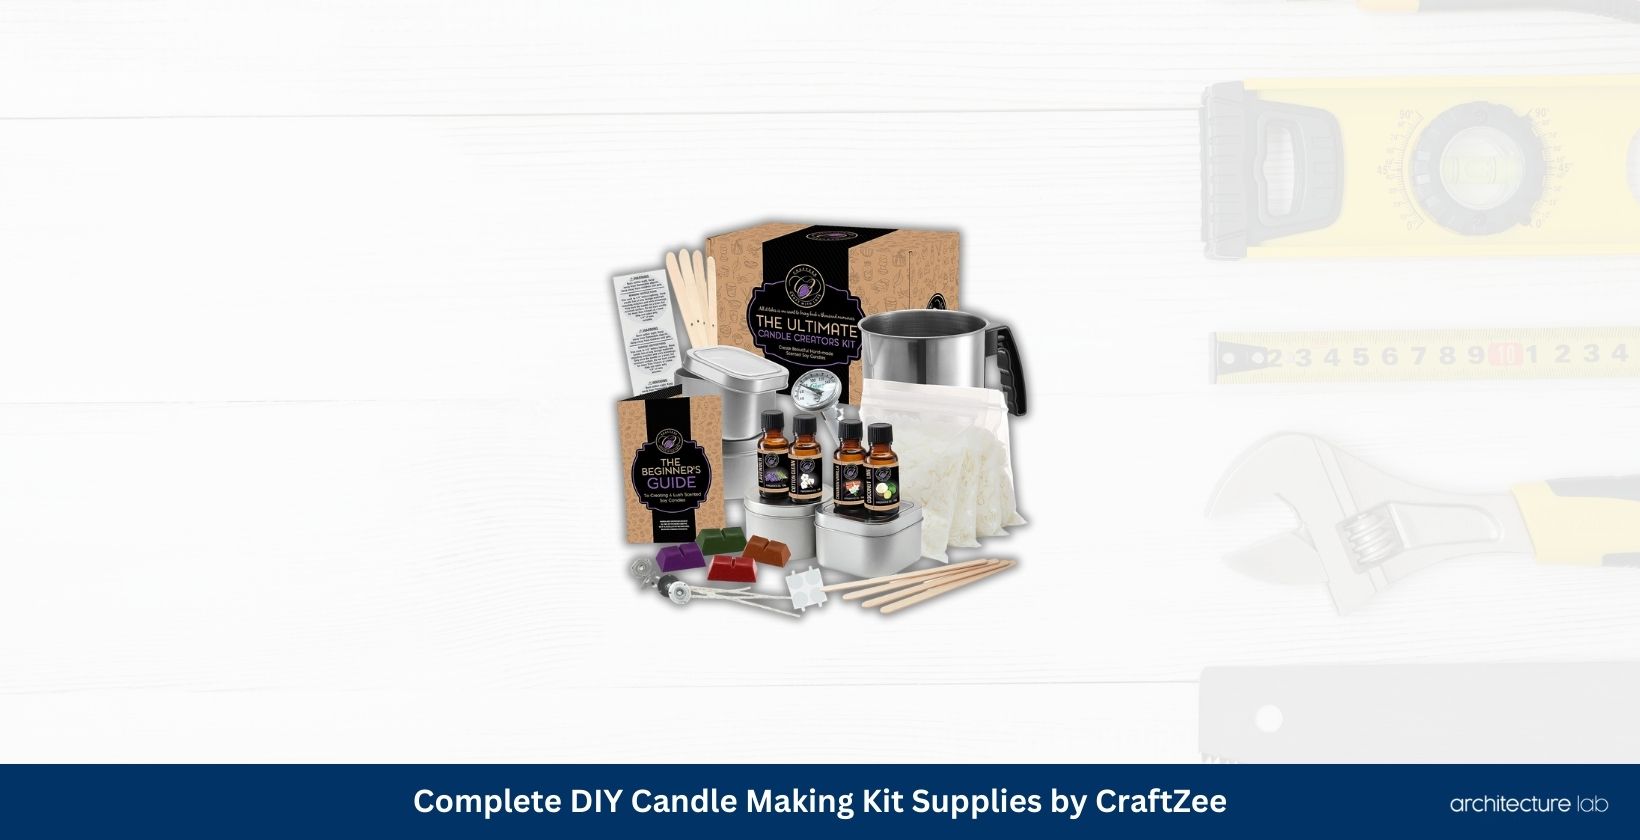 Complete diy candle making kit supplies by craftzee